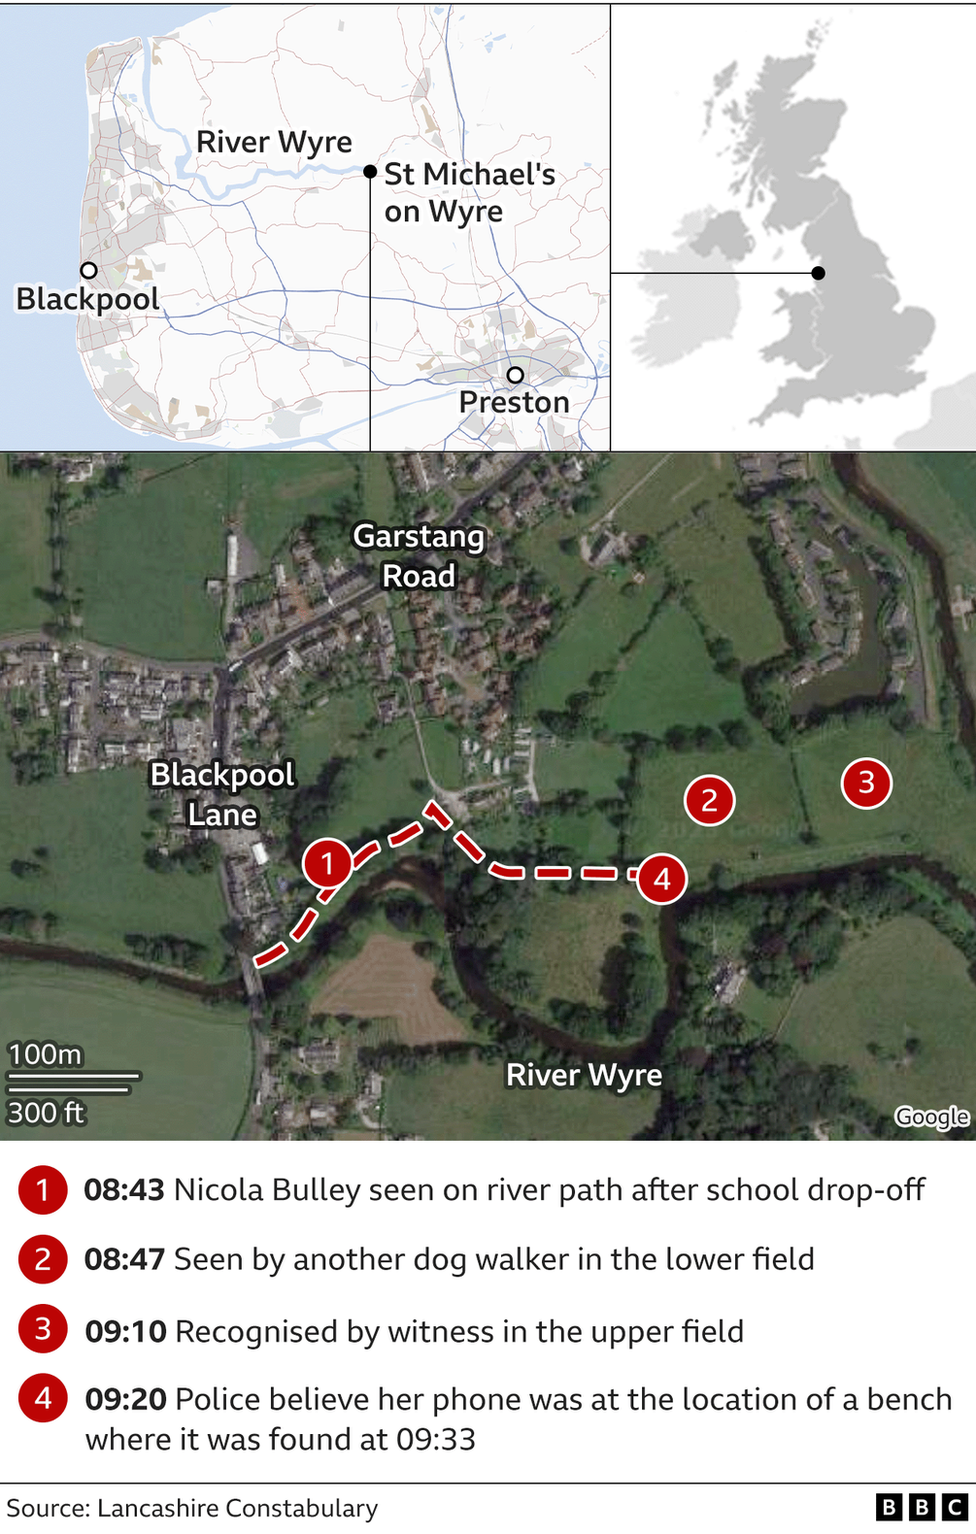 Map showing the last sightings of Nicola Bulley in St Michael's on Wyre showing she was seen on a river side path at 08.43, in a field at 08:47, another field at 9:10 and that her phone was near a river side bench at 09:20